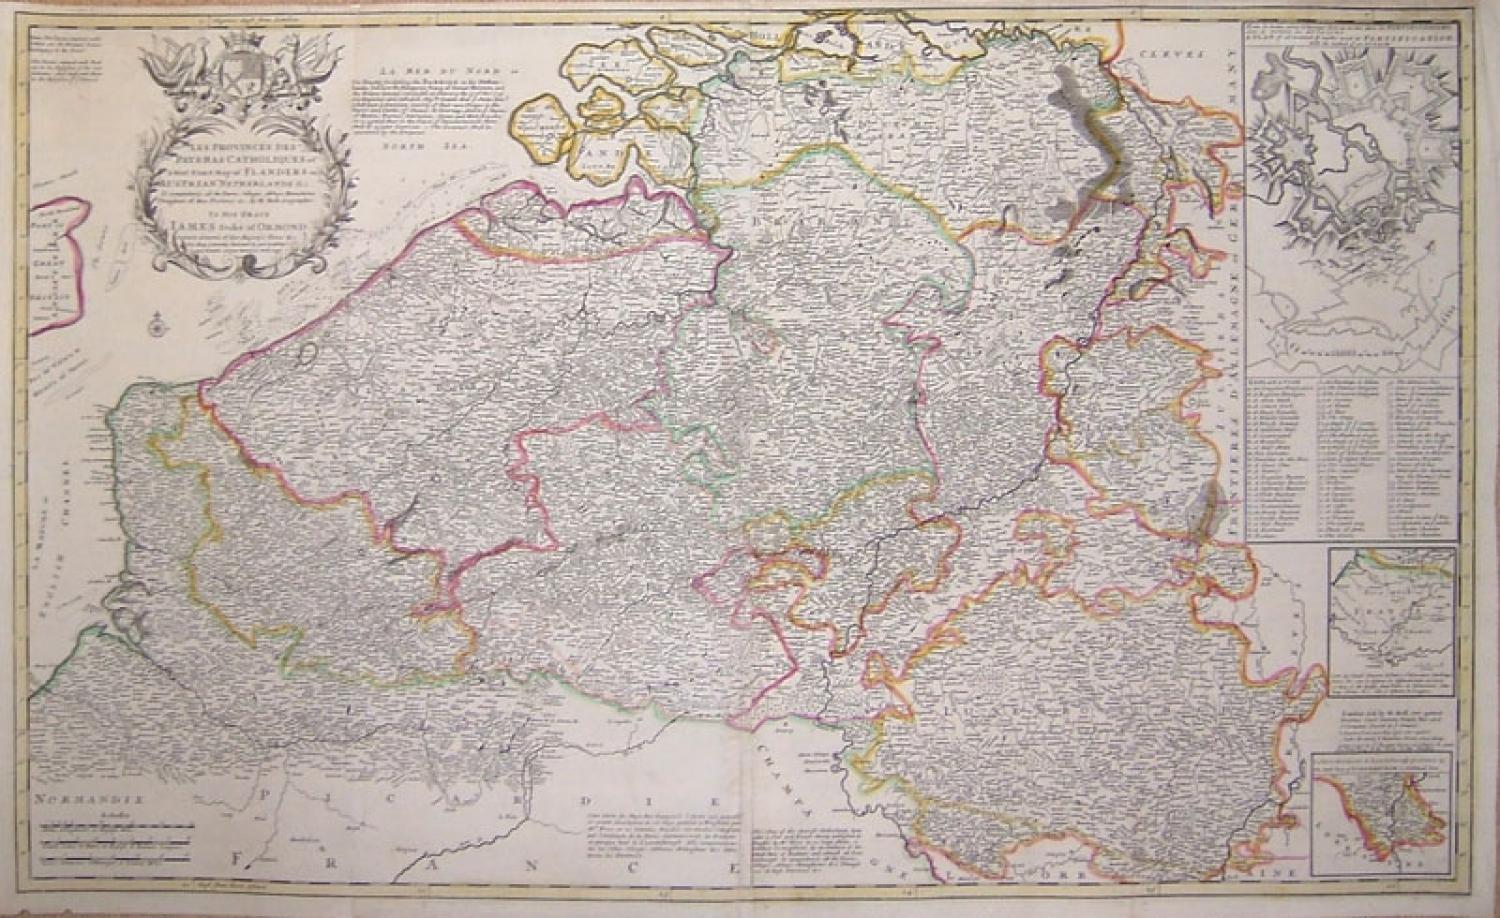 Moll - A Most Exact Map of Flanders